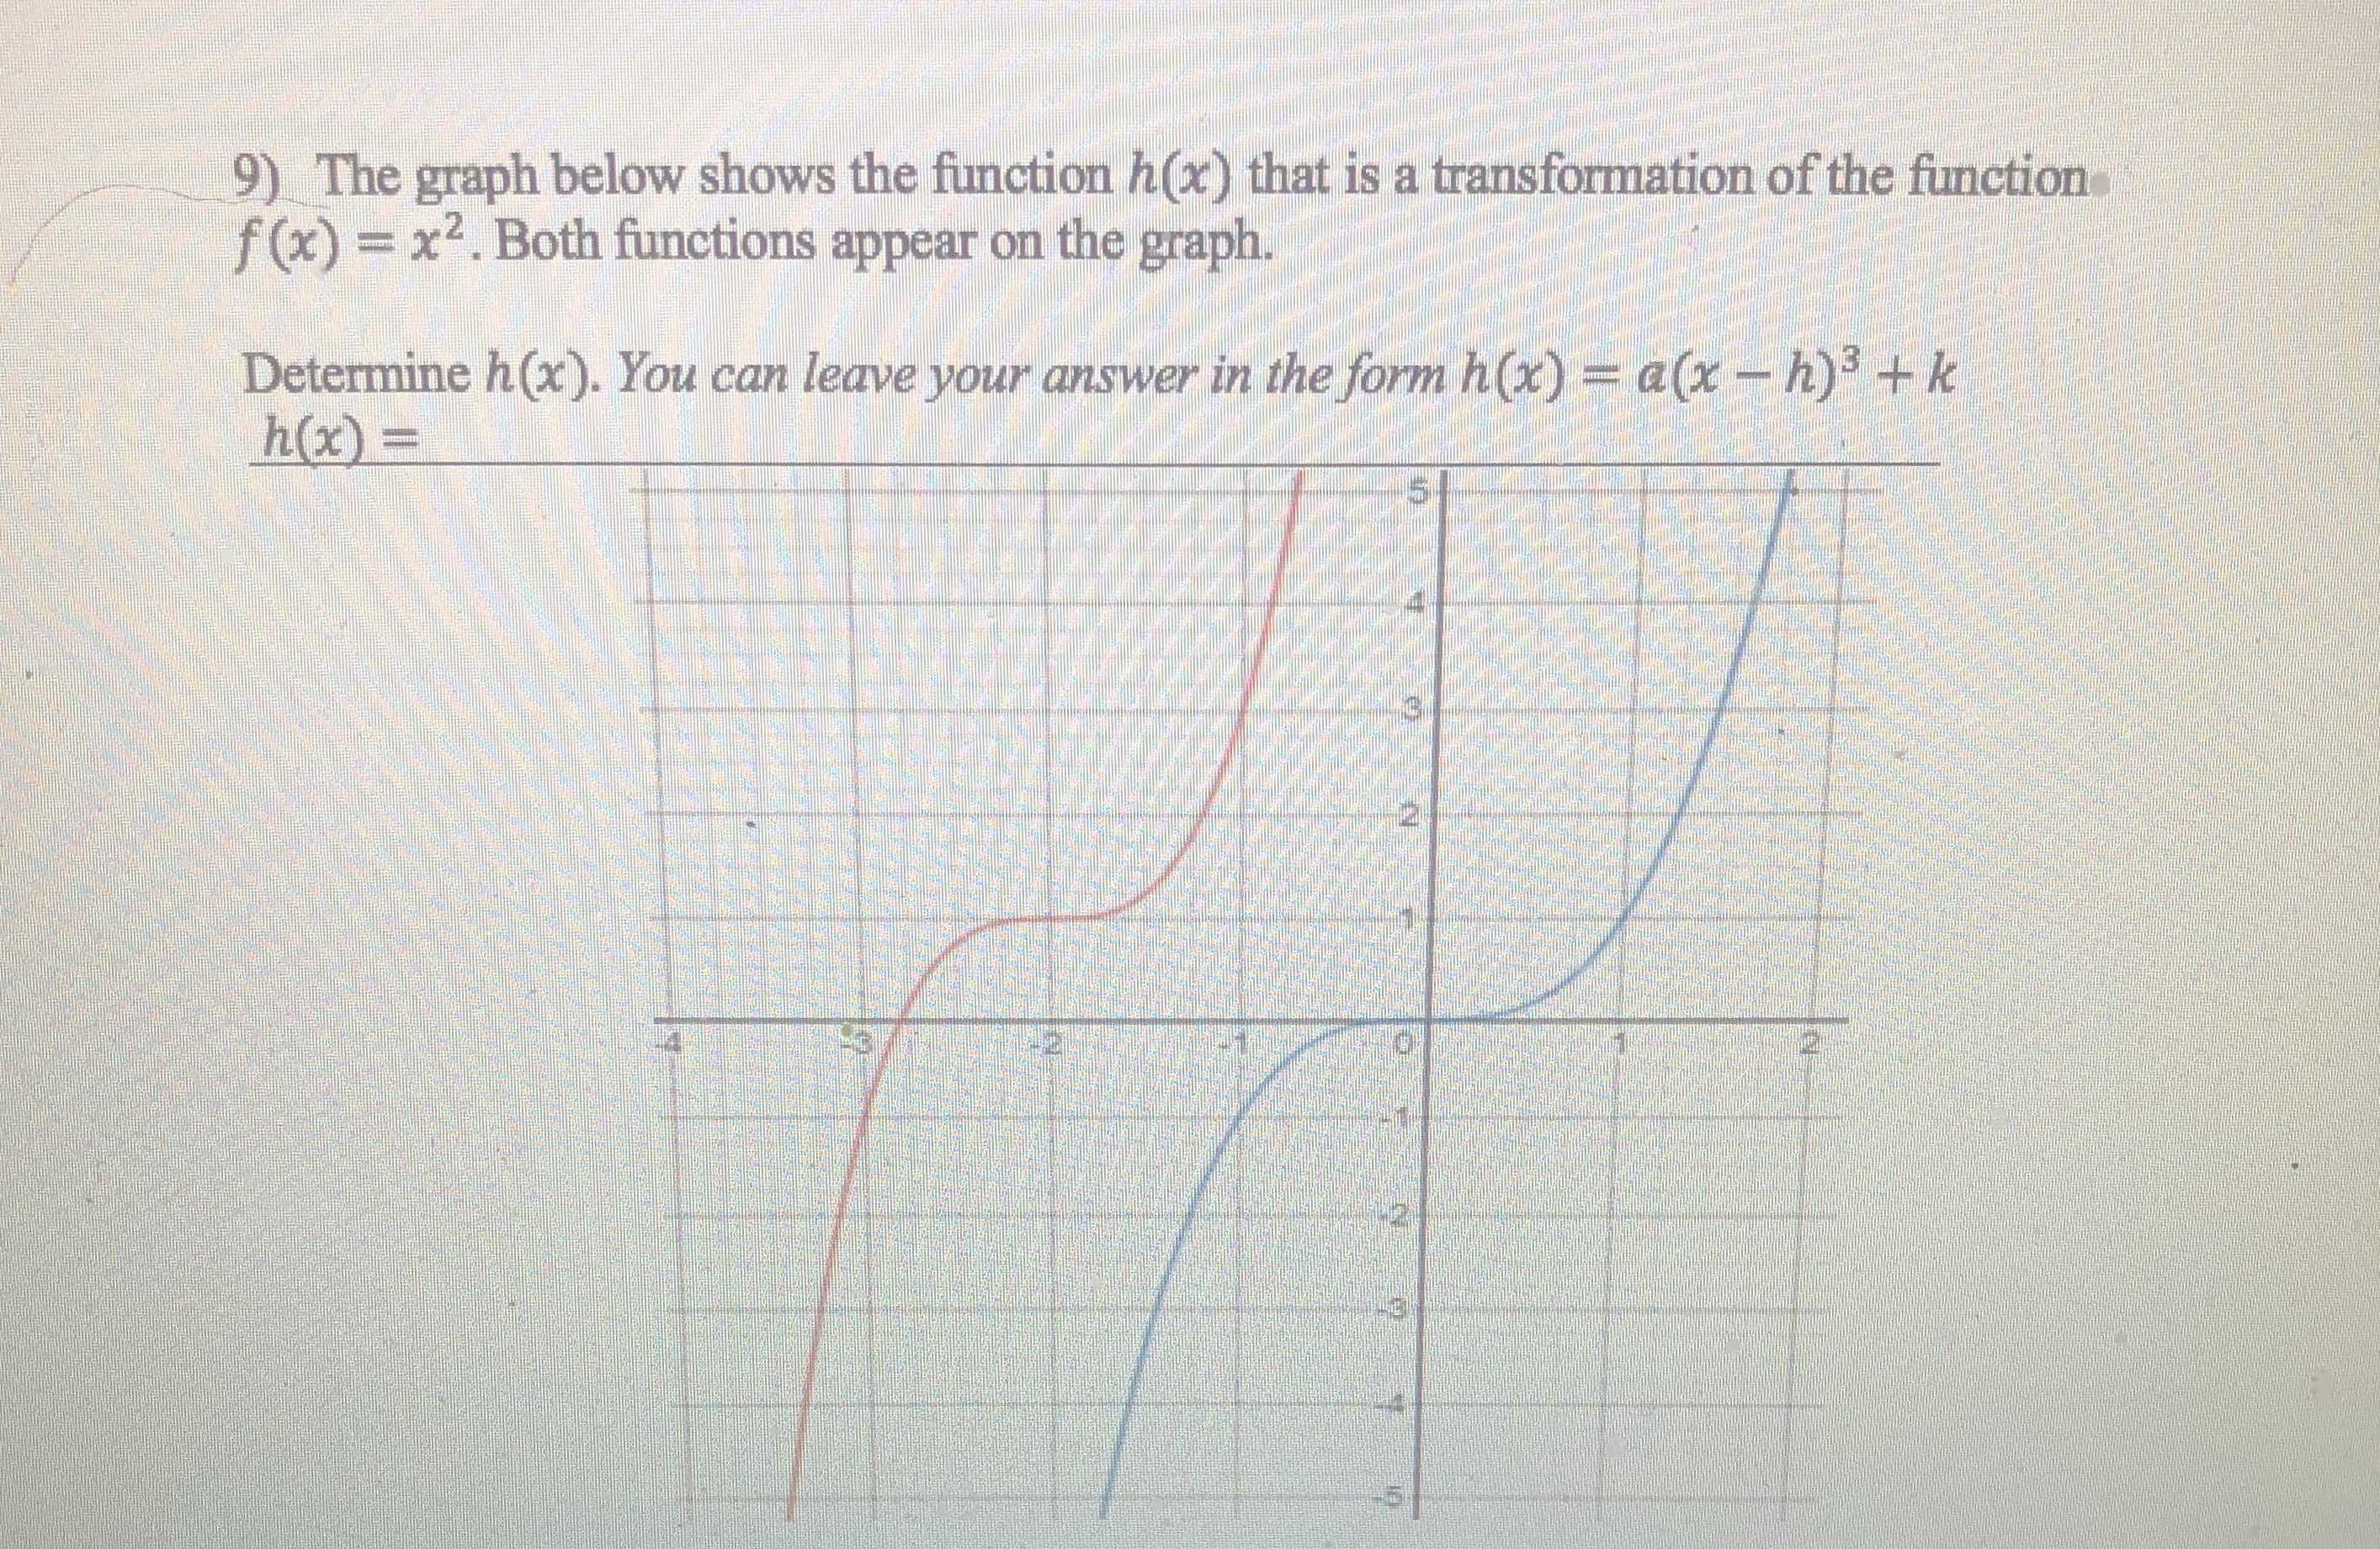 9) The graph below shows the function h(x) that is a transformation of the function
f (x) = x2. Both functions appear on the graph.
Determine h(x). You can leave your answer in the form h(x) = a(x - h) + k
h(x) =
